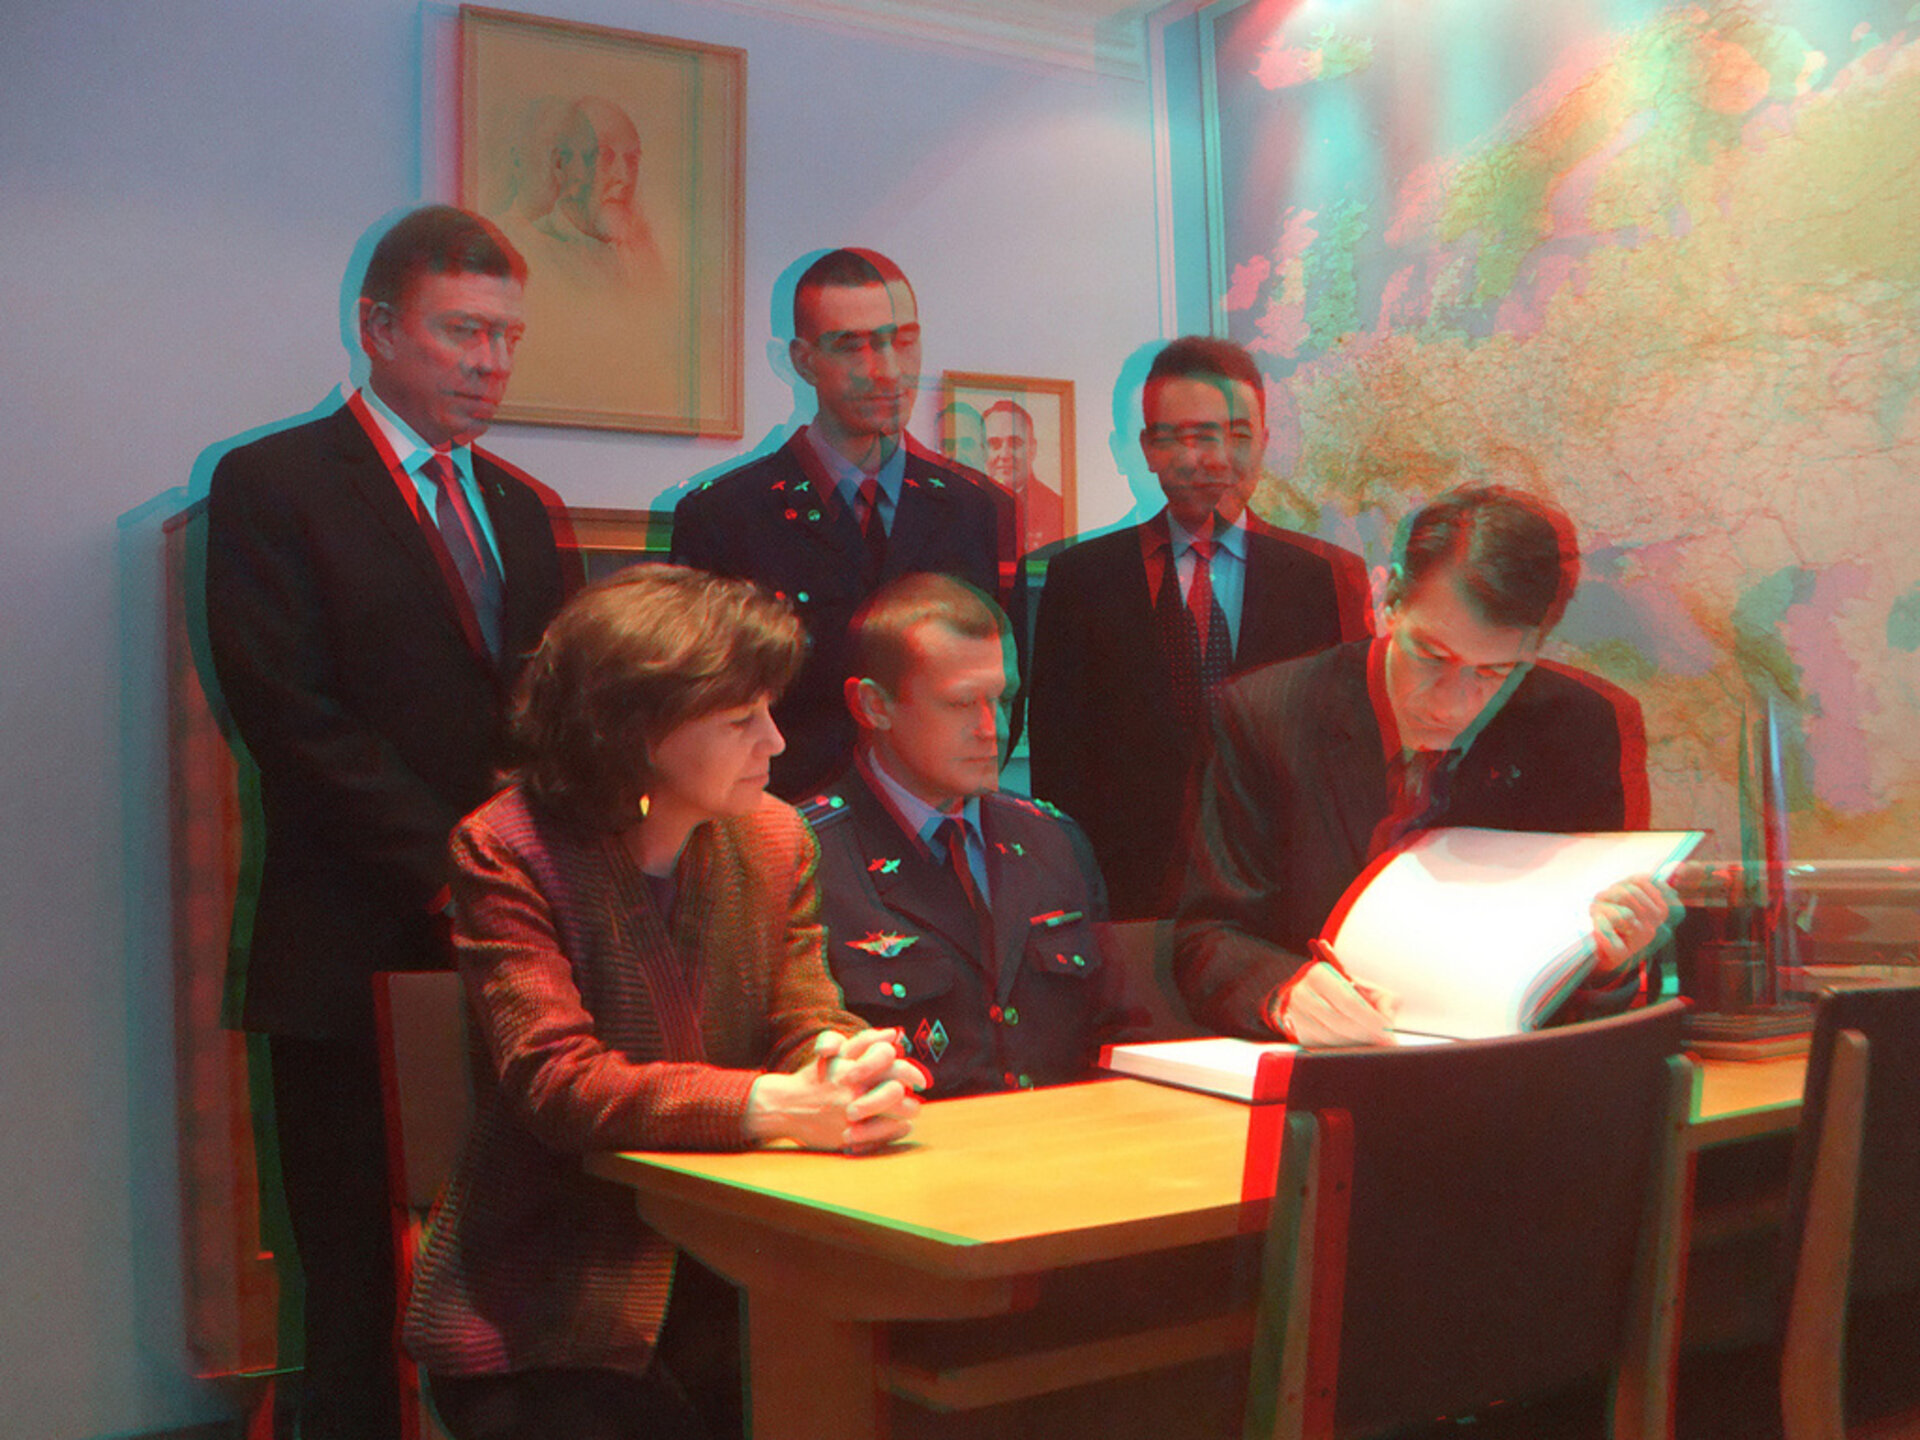 Signing the guest book in Gagarin's office (3D image)